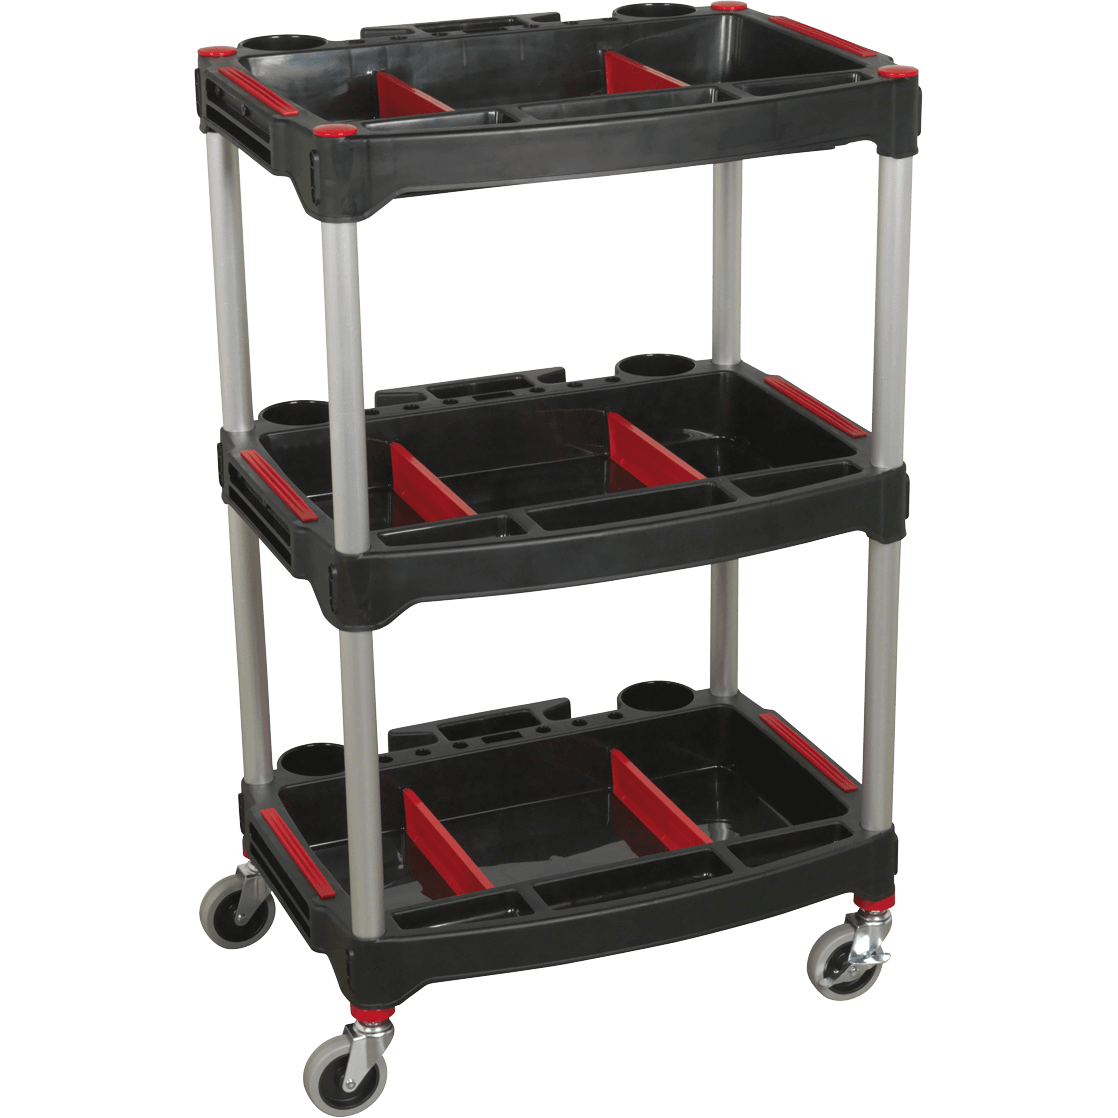 Photos - Ladder Sealey 3 Shelf Composite Trolley with Parts Storage Black / Red CX313 